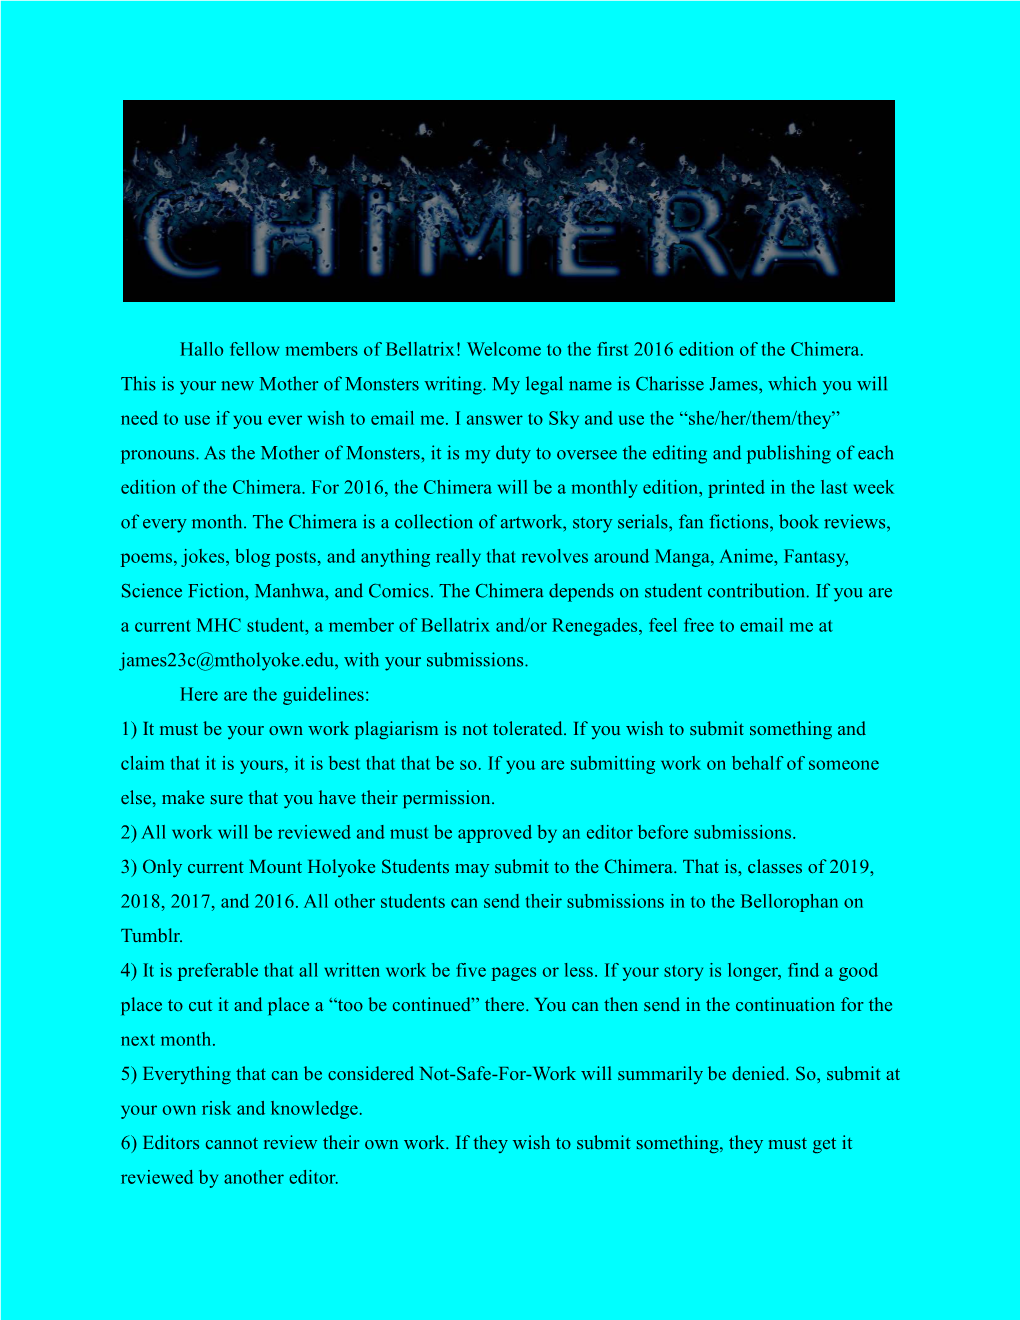 Hallo Fellow Members of Bellatrix! Welcome to the First 2016 Edition of the Chimera